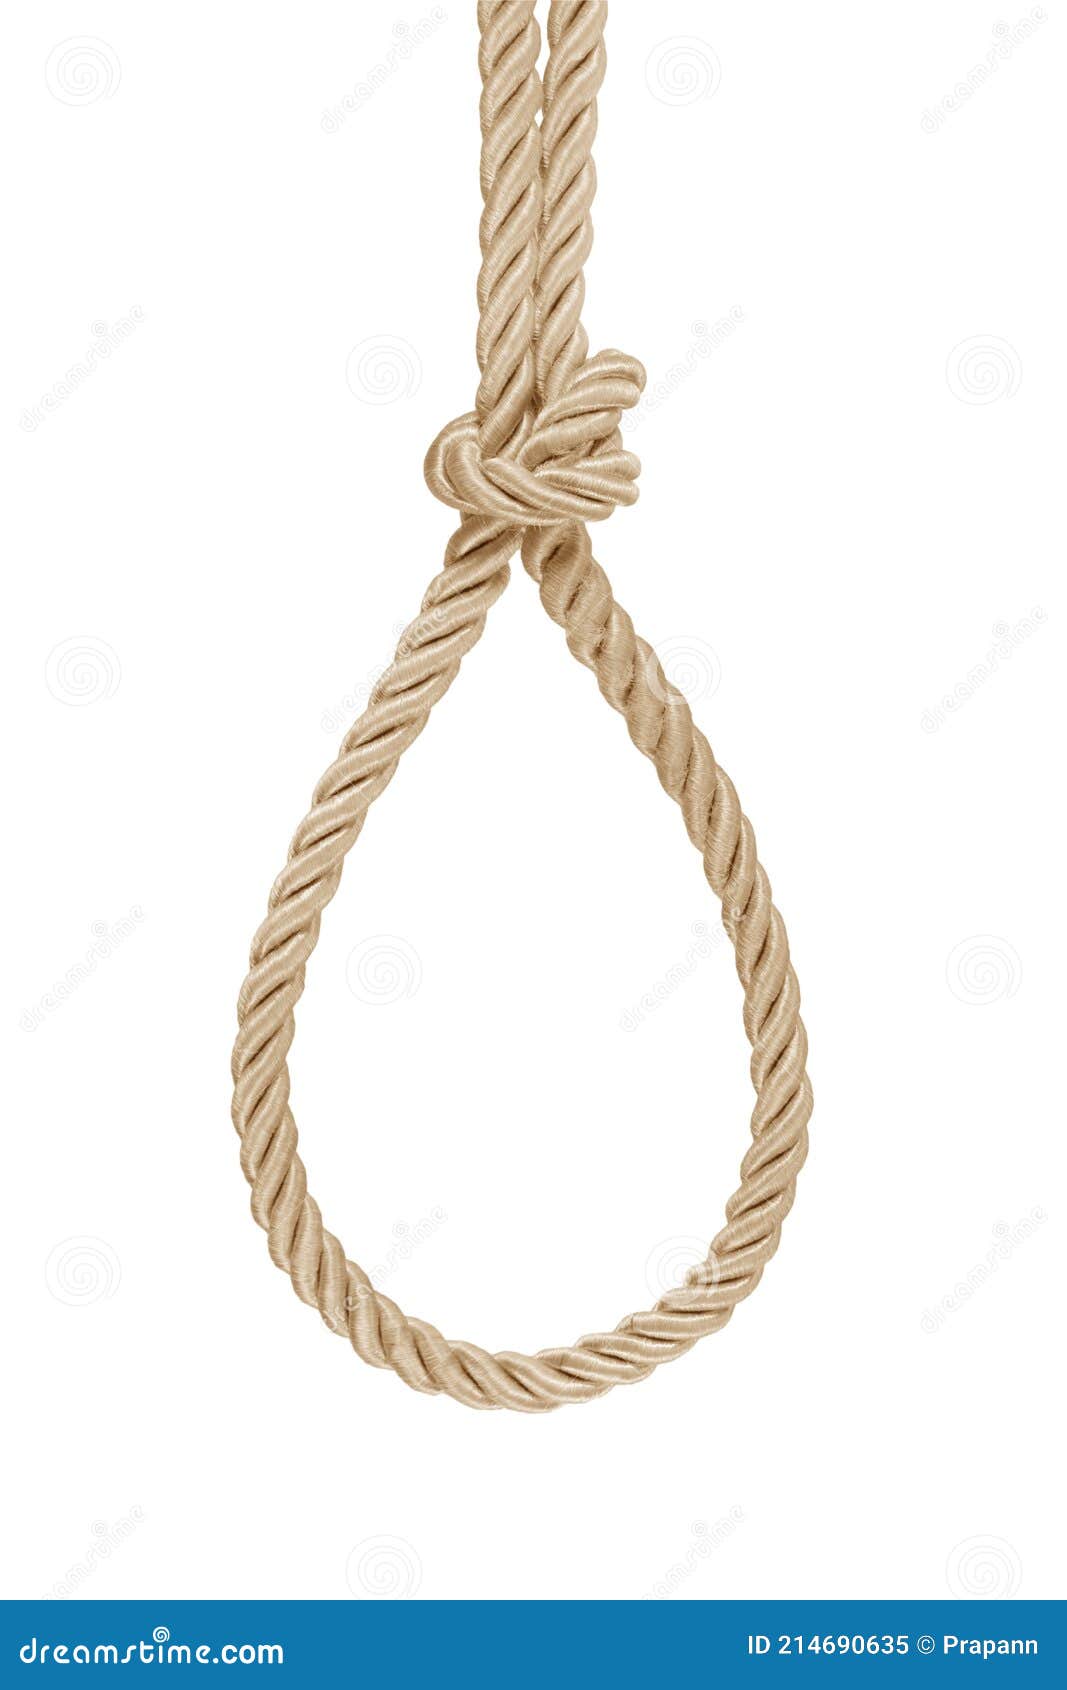 https://thumbs.dreamstime.com/z/hanging-rope-knot-tied-isolated-white-214690635.jpg